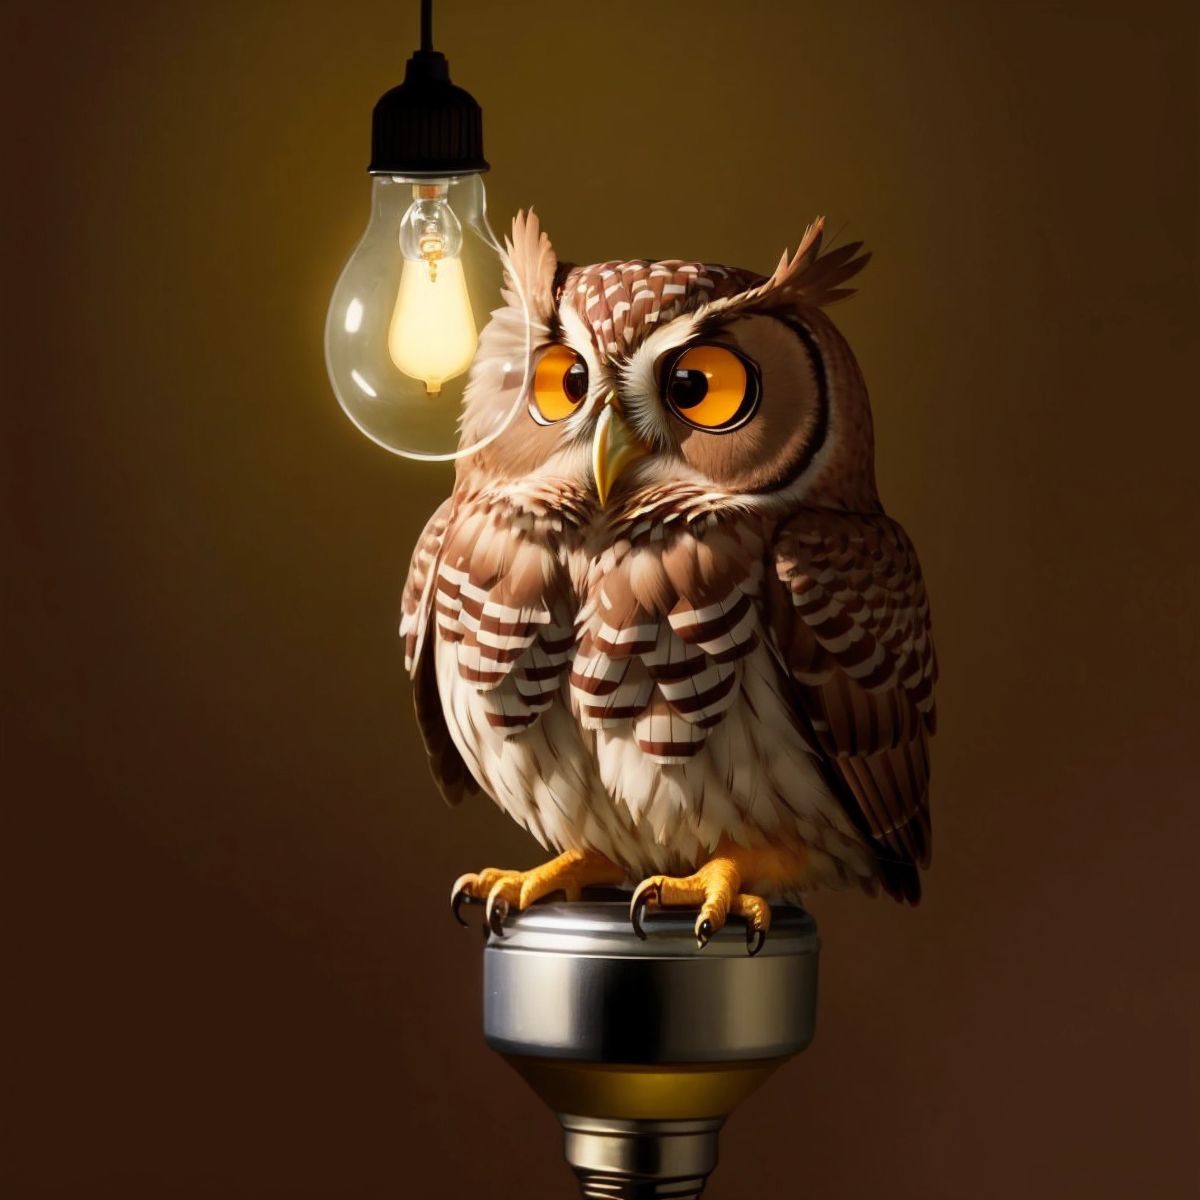 Thinky, the owl, inside a light bulb, representing a bright idea, with an expression of enlightenment.